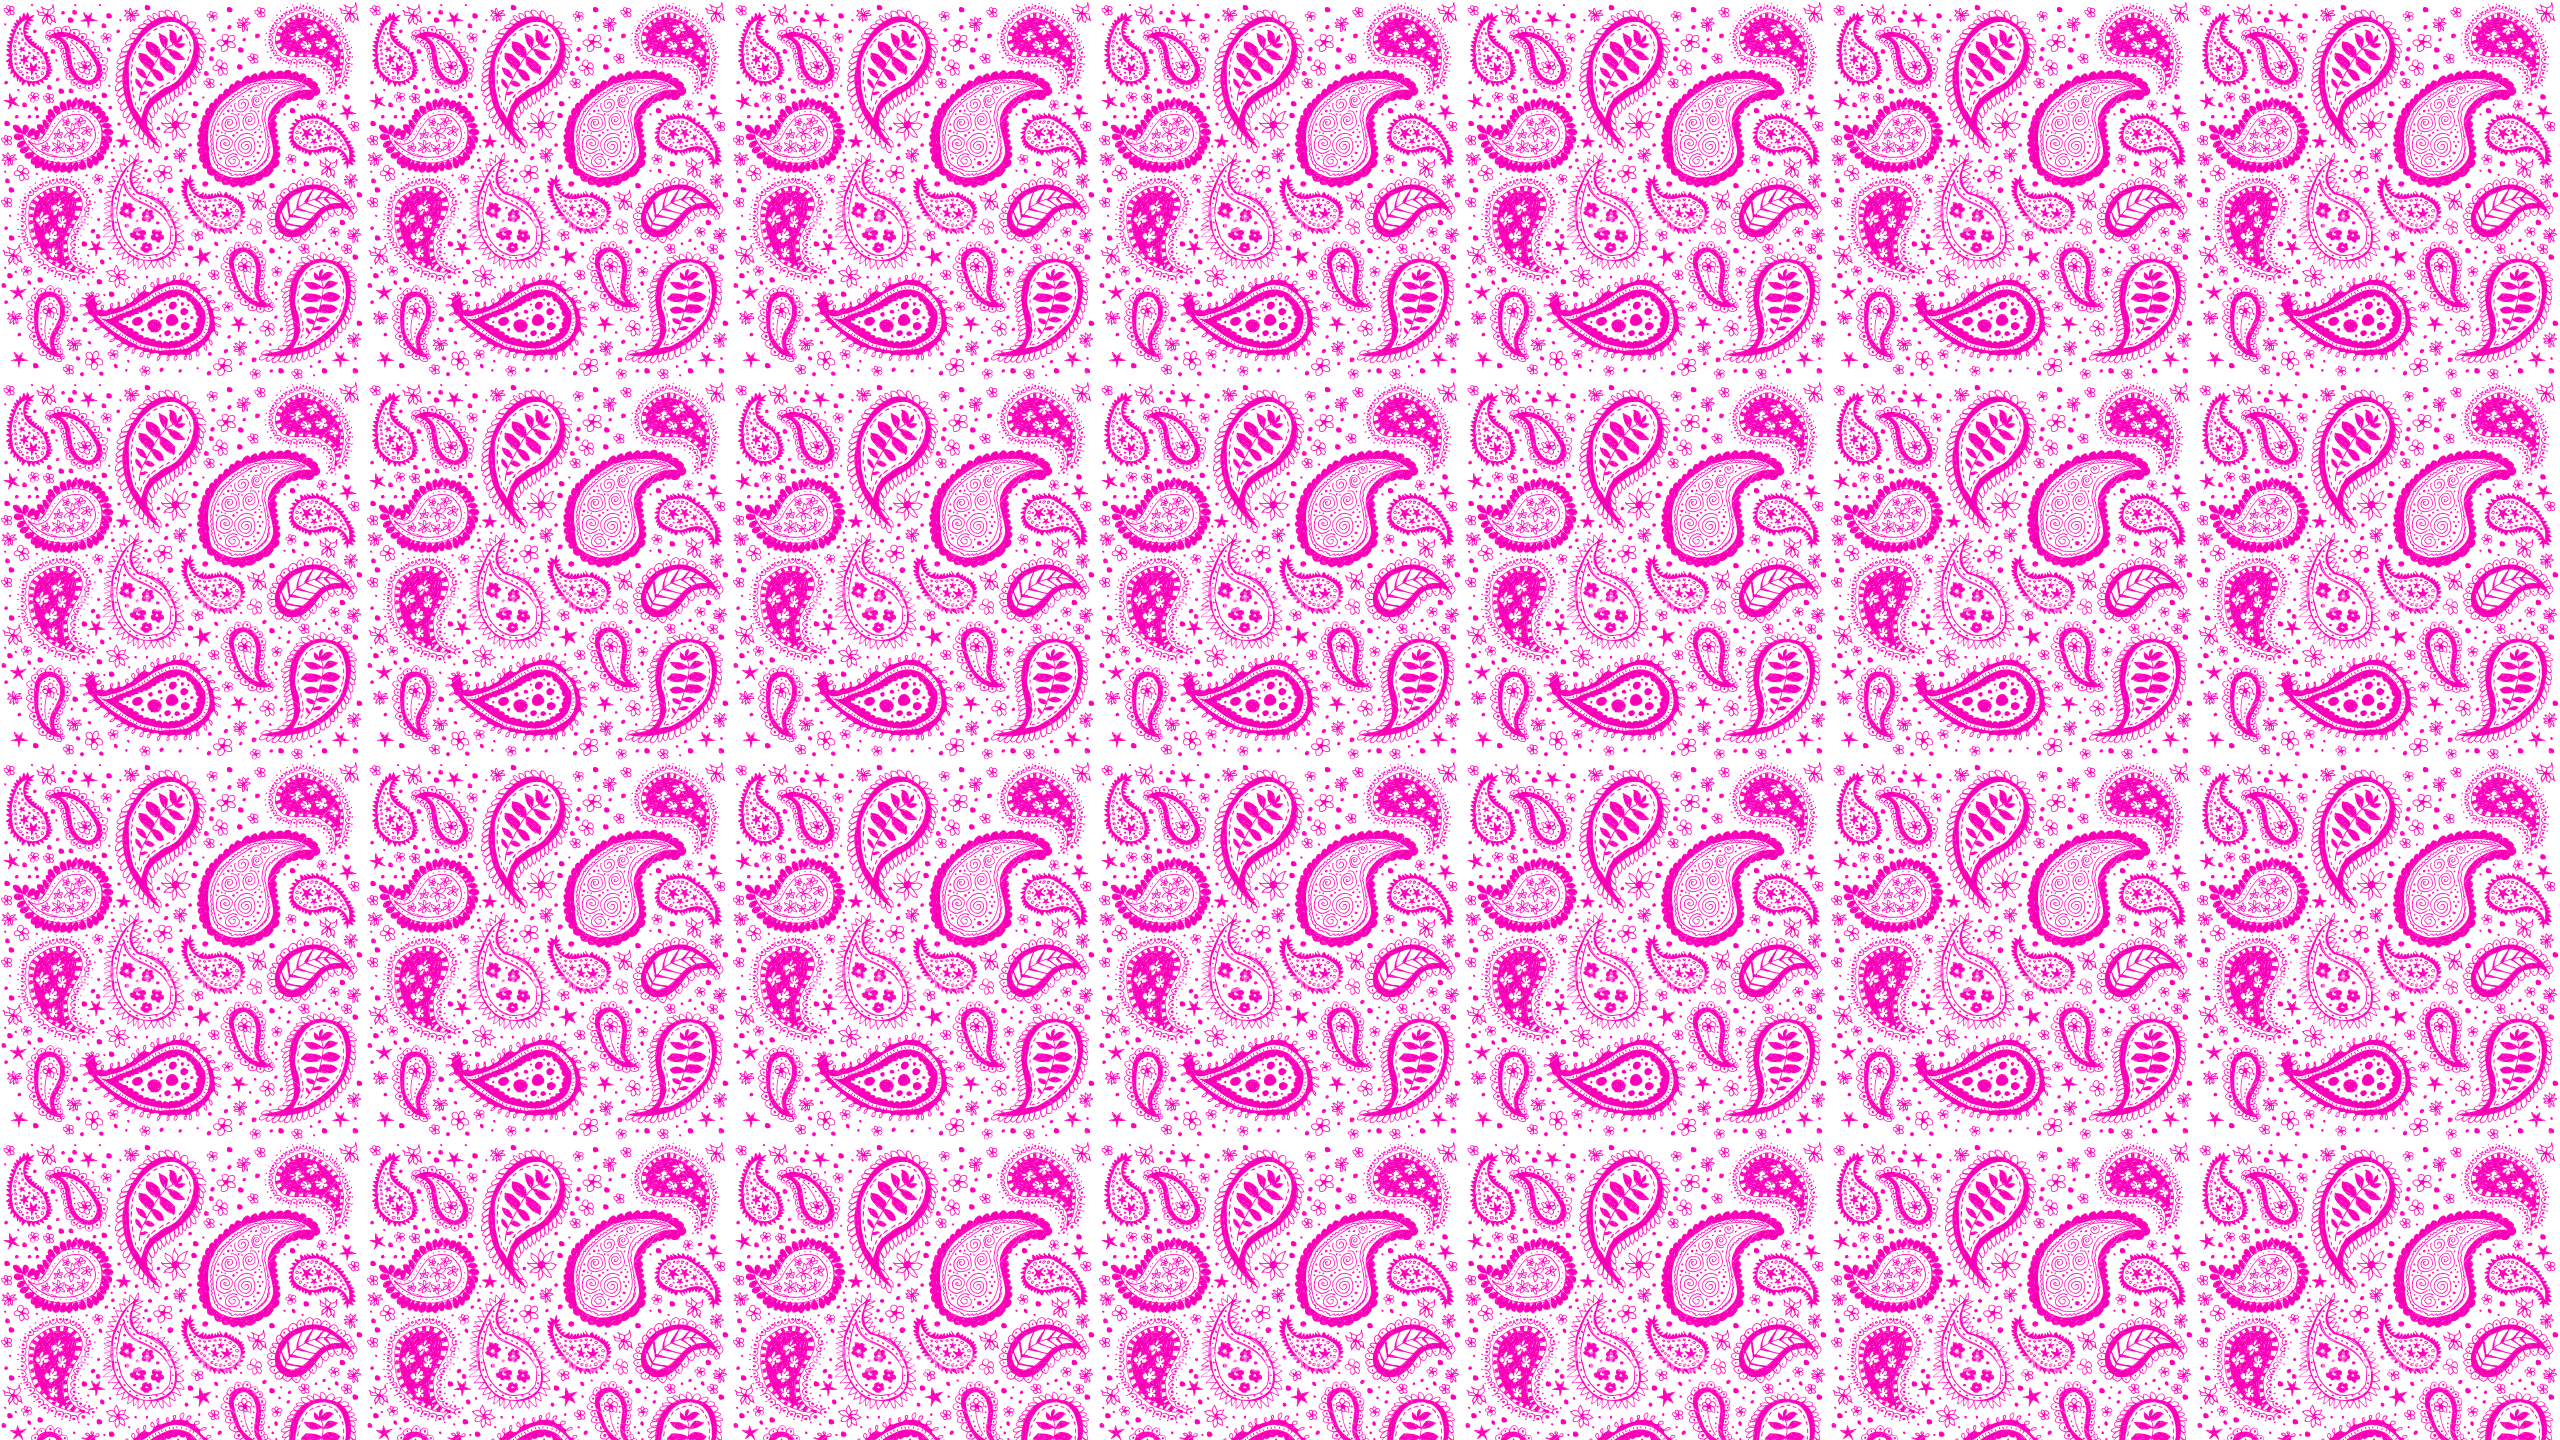 this Pink Paisley Desktop Wallpaper is easy Just save the wallpaper